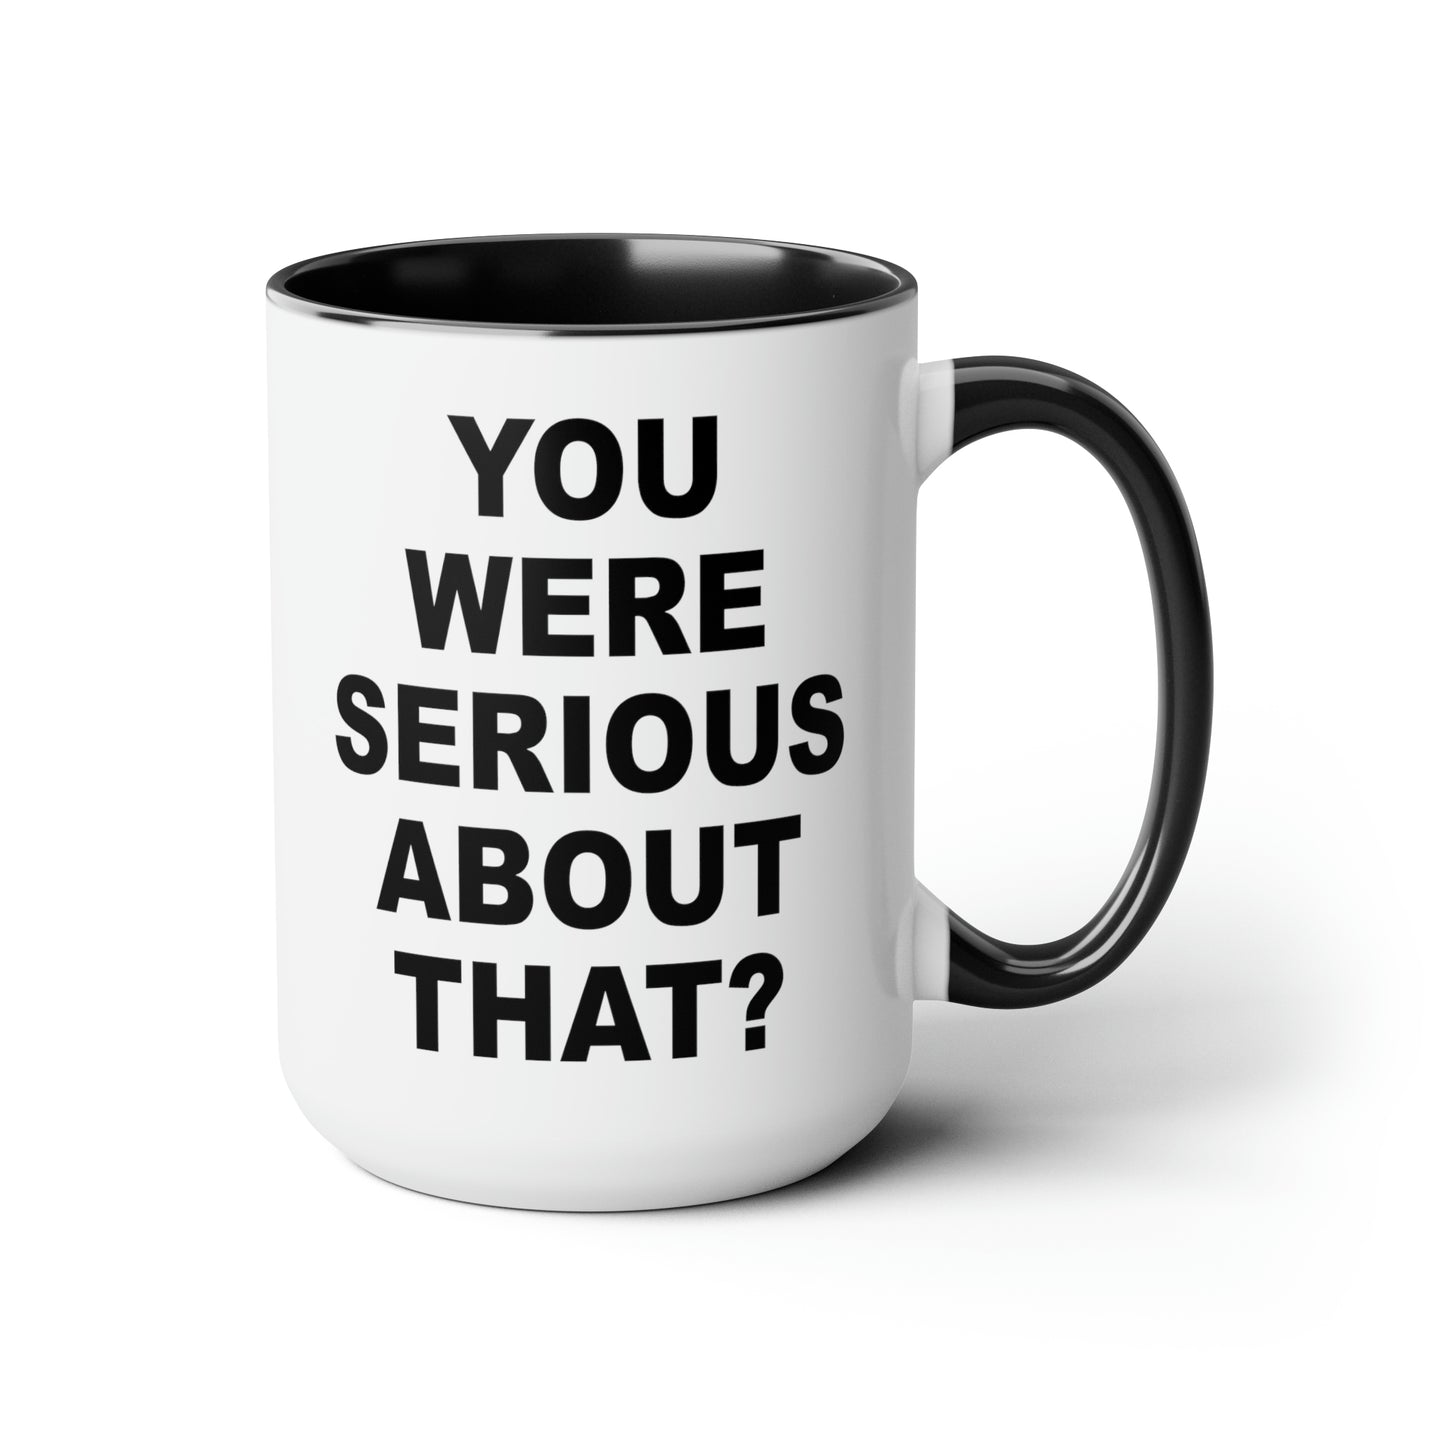 You Were Serious About That? Coffee Mug - Double Sided Black Accent White Ceramic 15oz by TheGlassyLass.com